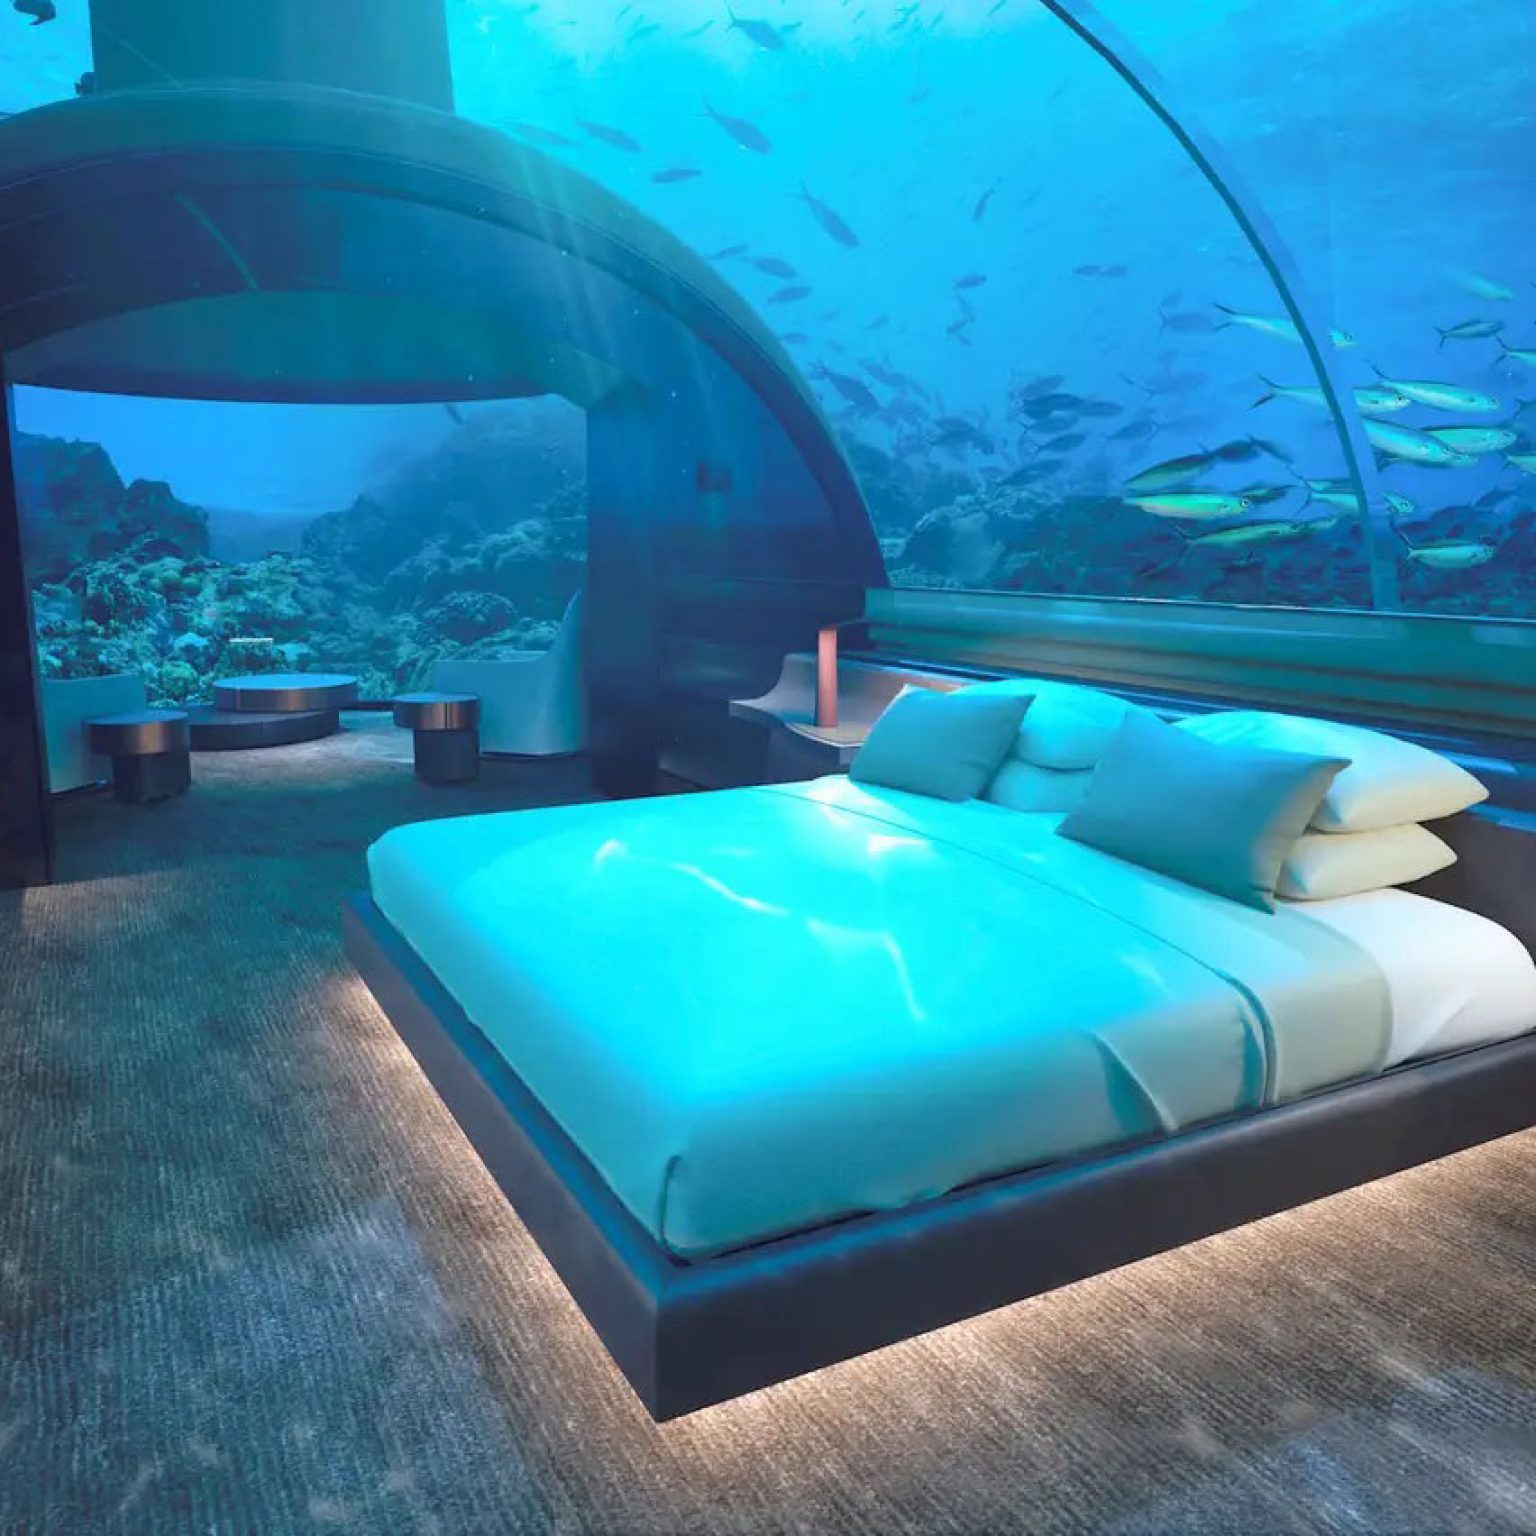 The Muraka Hotel in the Maldives Offers Guest an Above and Below Water ...